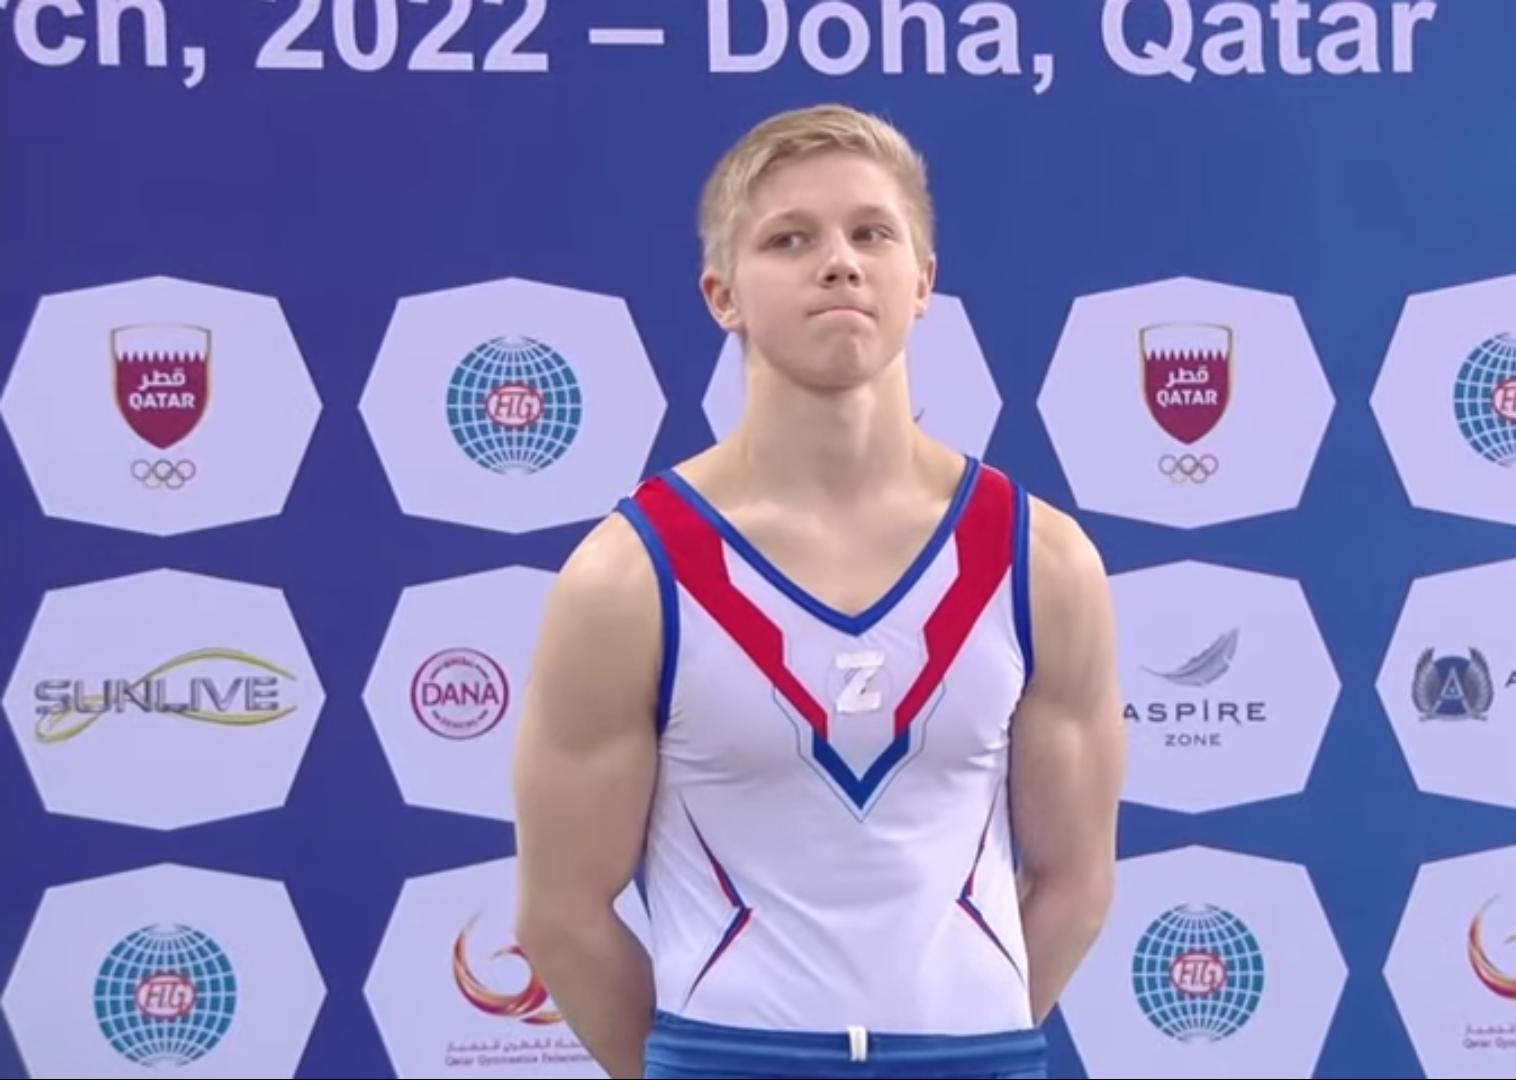 Ivan Kuliak faces disciplinary action after displaying a Z symbol during the podium ceremony yesterday ©YouTube